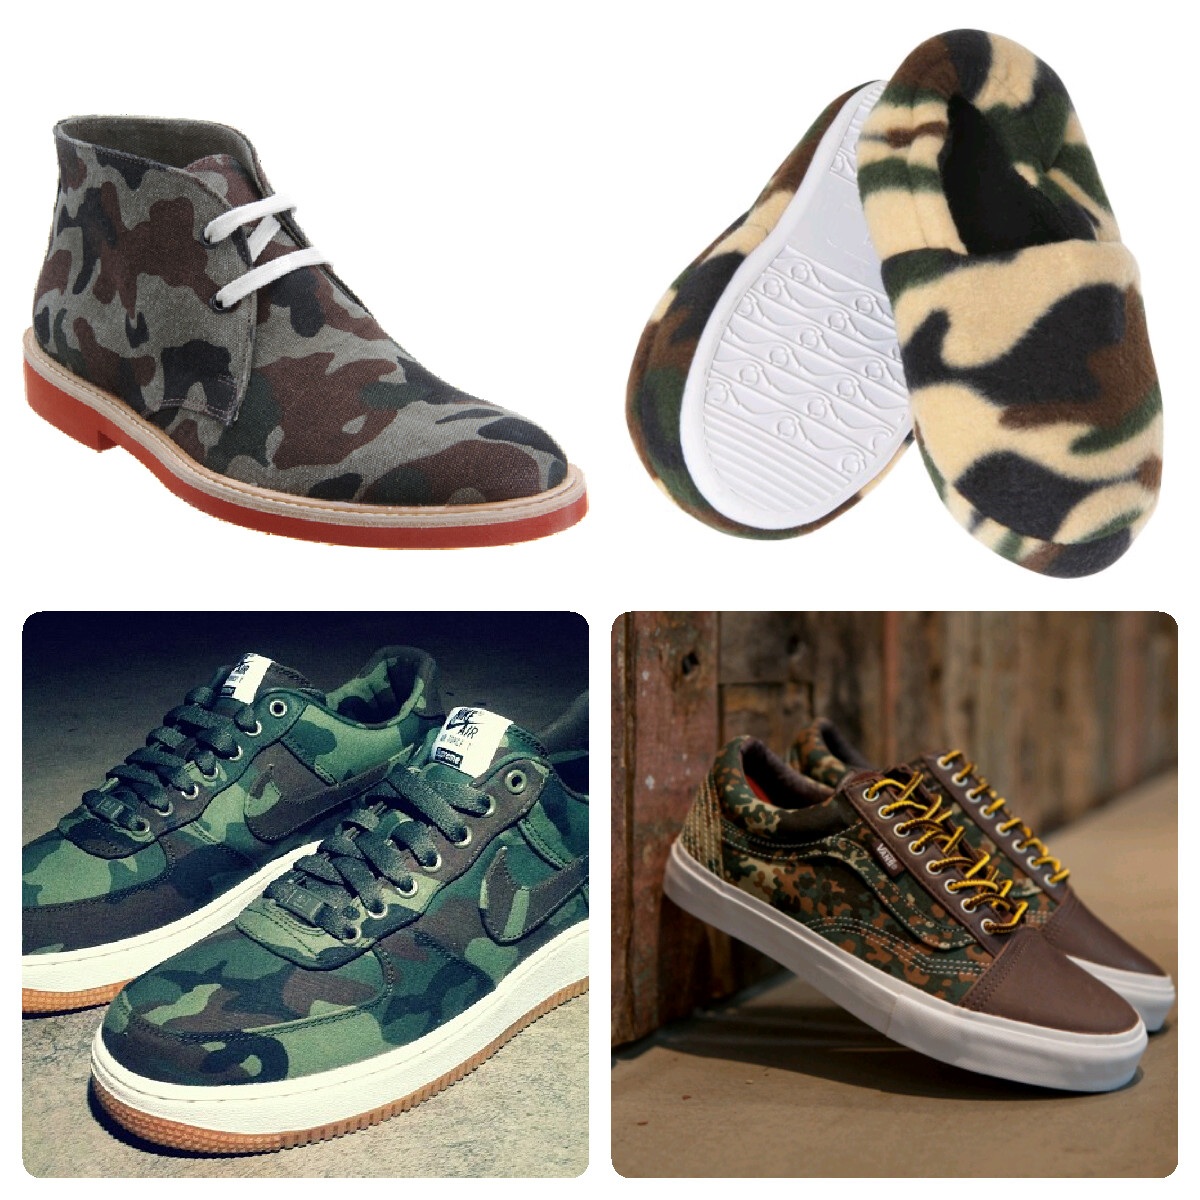 TREND: Men Camouflage Outfits